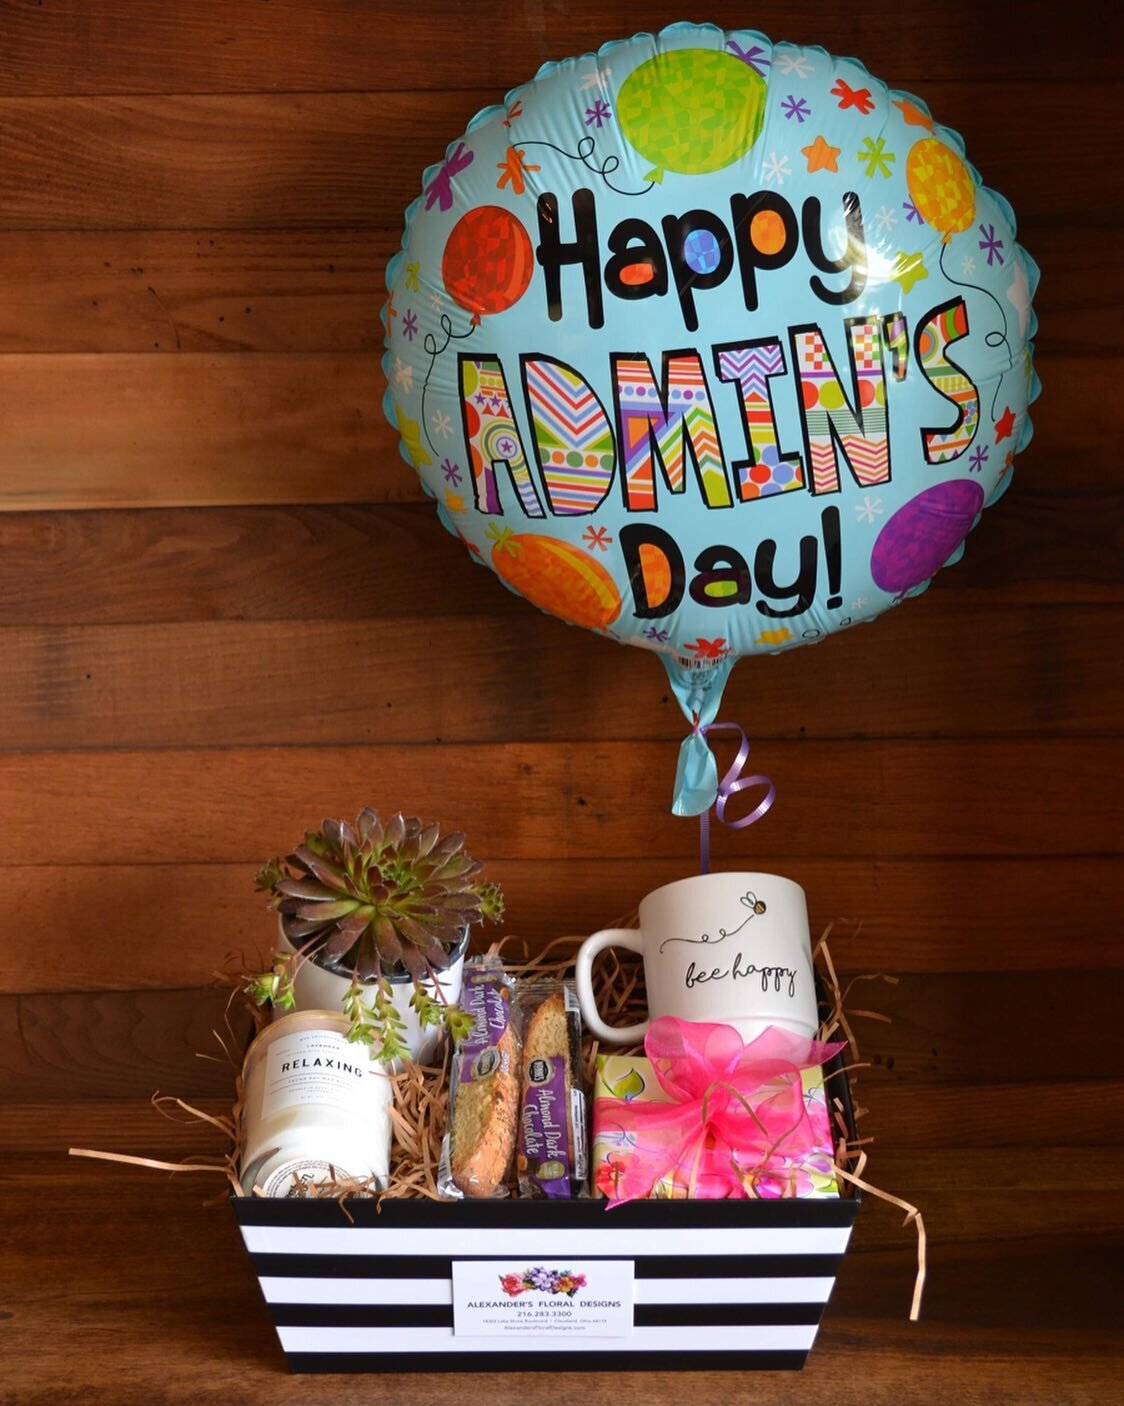 Celebrate The Dream Team. 
Administrative Professional`s Day is Wednesday April 21. Please help us to celebrate our local admins by sending this beautiful relaxation basket today. 

The Gift of Relaxation.
Give the gift of relaxation to the team that